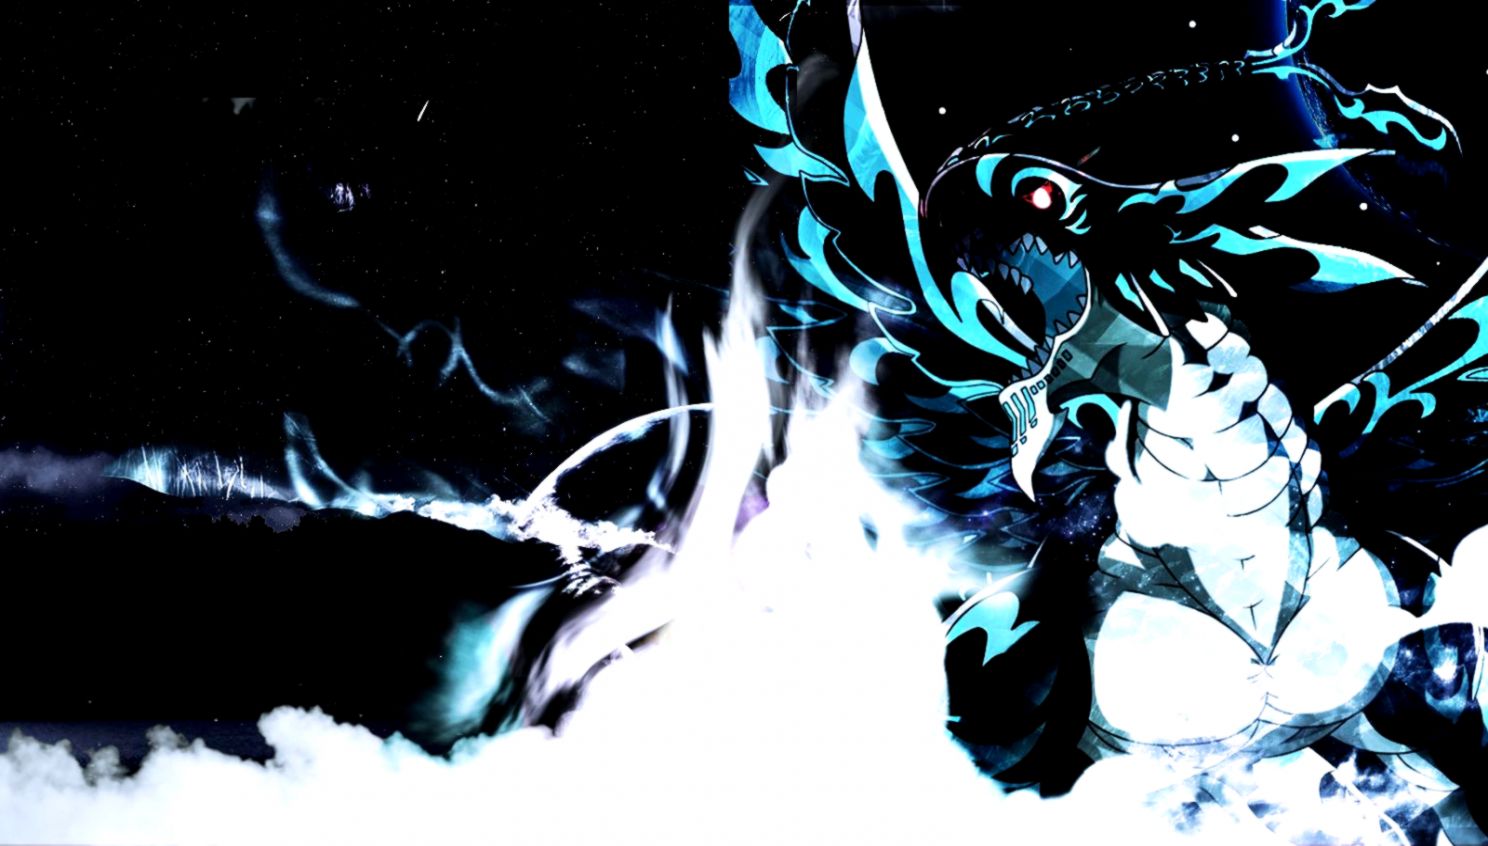 Fairy Tail Wallpapers Hd Wallpaper Cave - Fairy Tail Wallpaper Acnologia - HD Wallpaper 